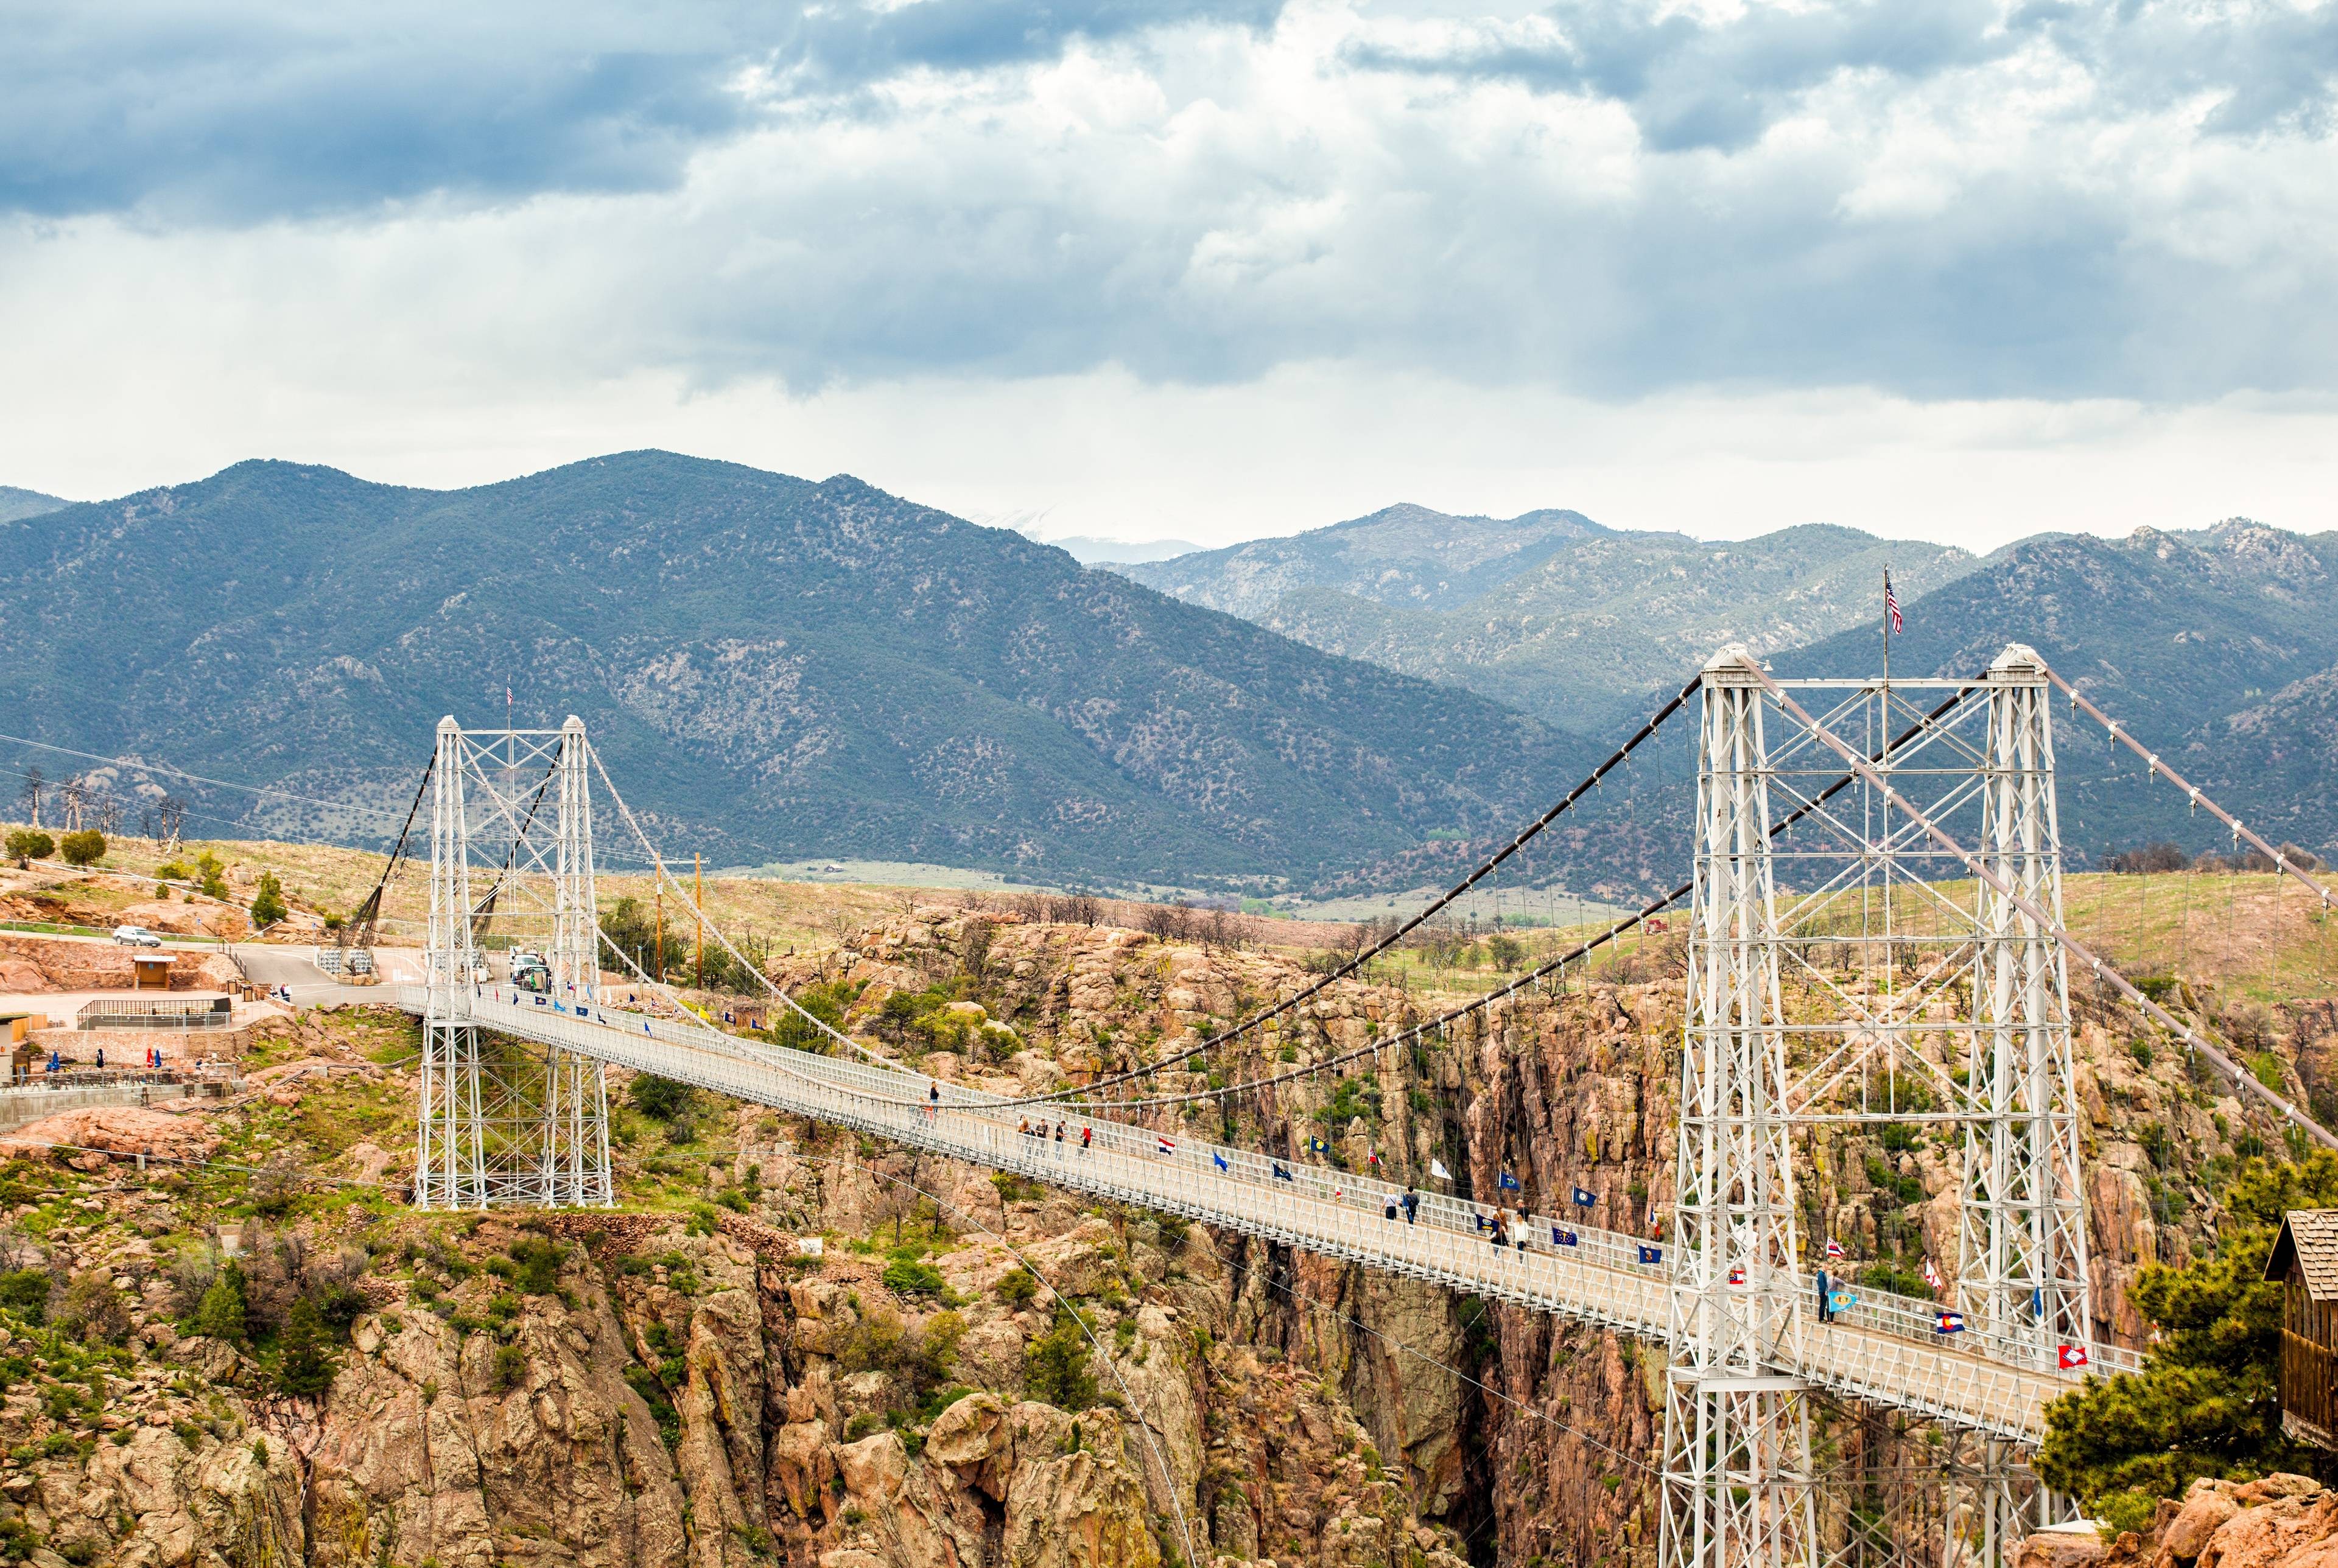 ⚡ Spend a Day in the Great Outdoors Surrounding Colorado Springs